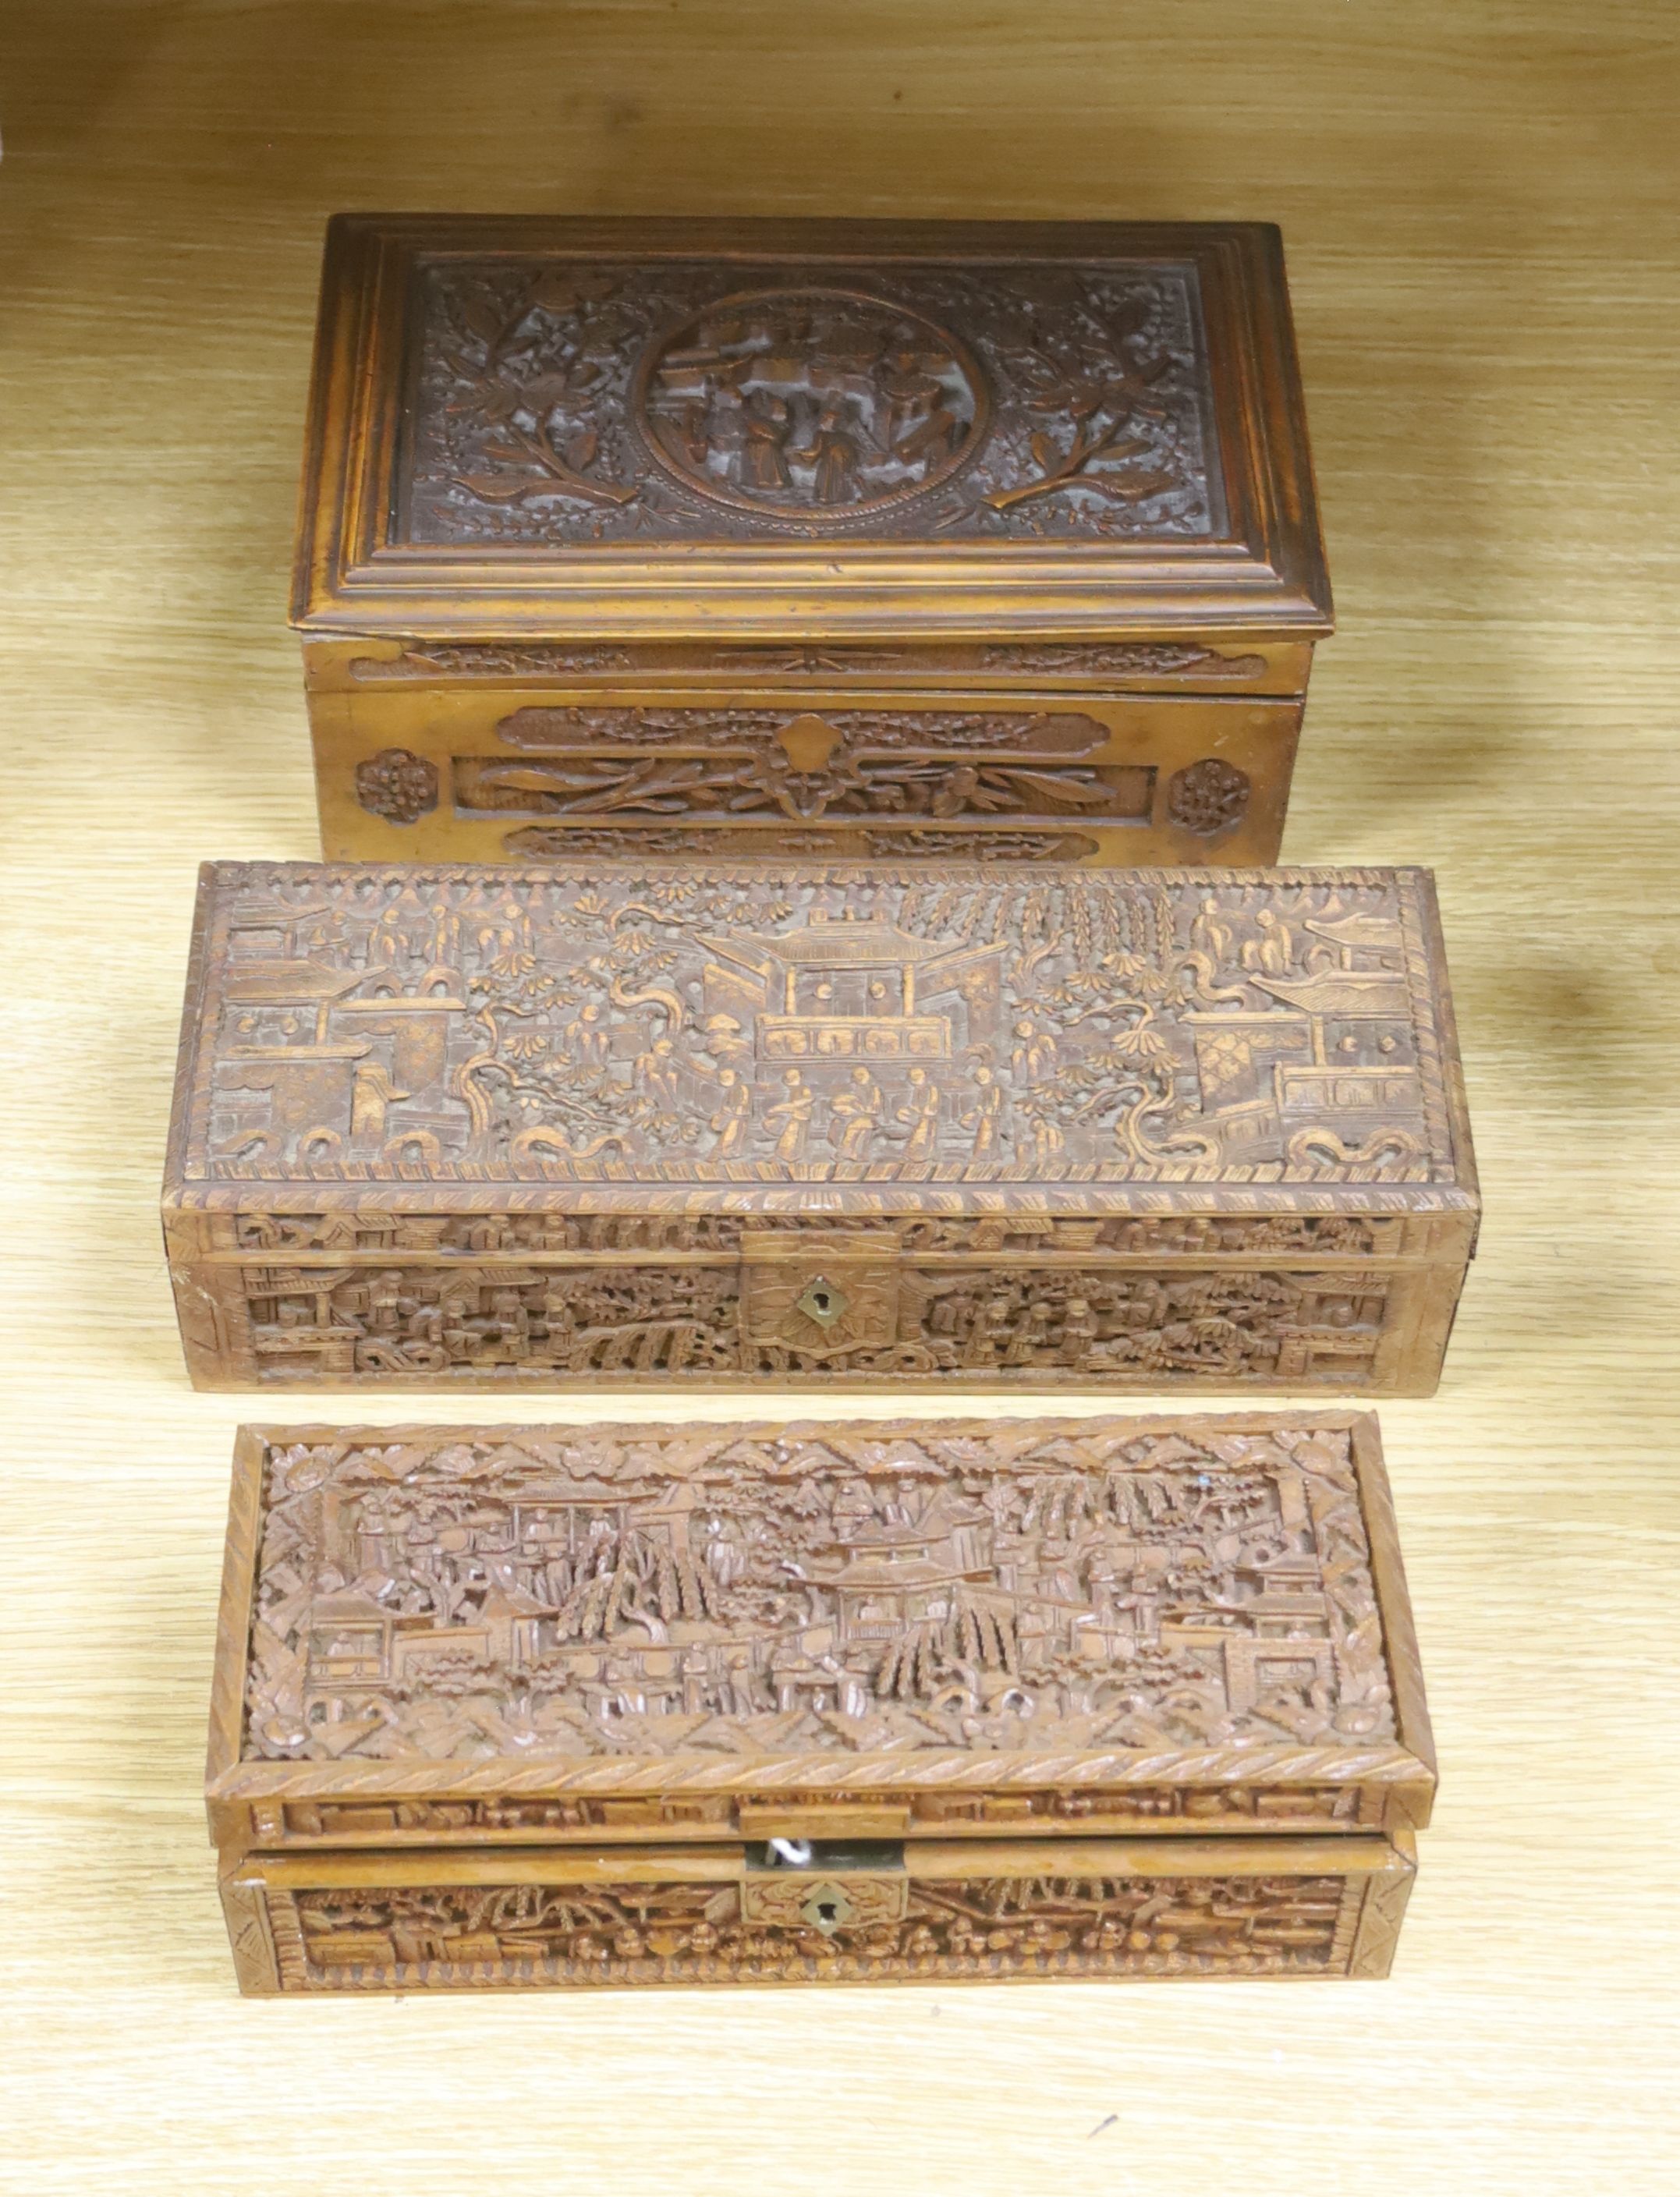 Three 19th century Chinese carved sandalwood boxes, 19th/20th century, longest 30cm